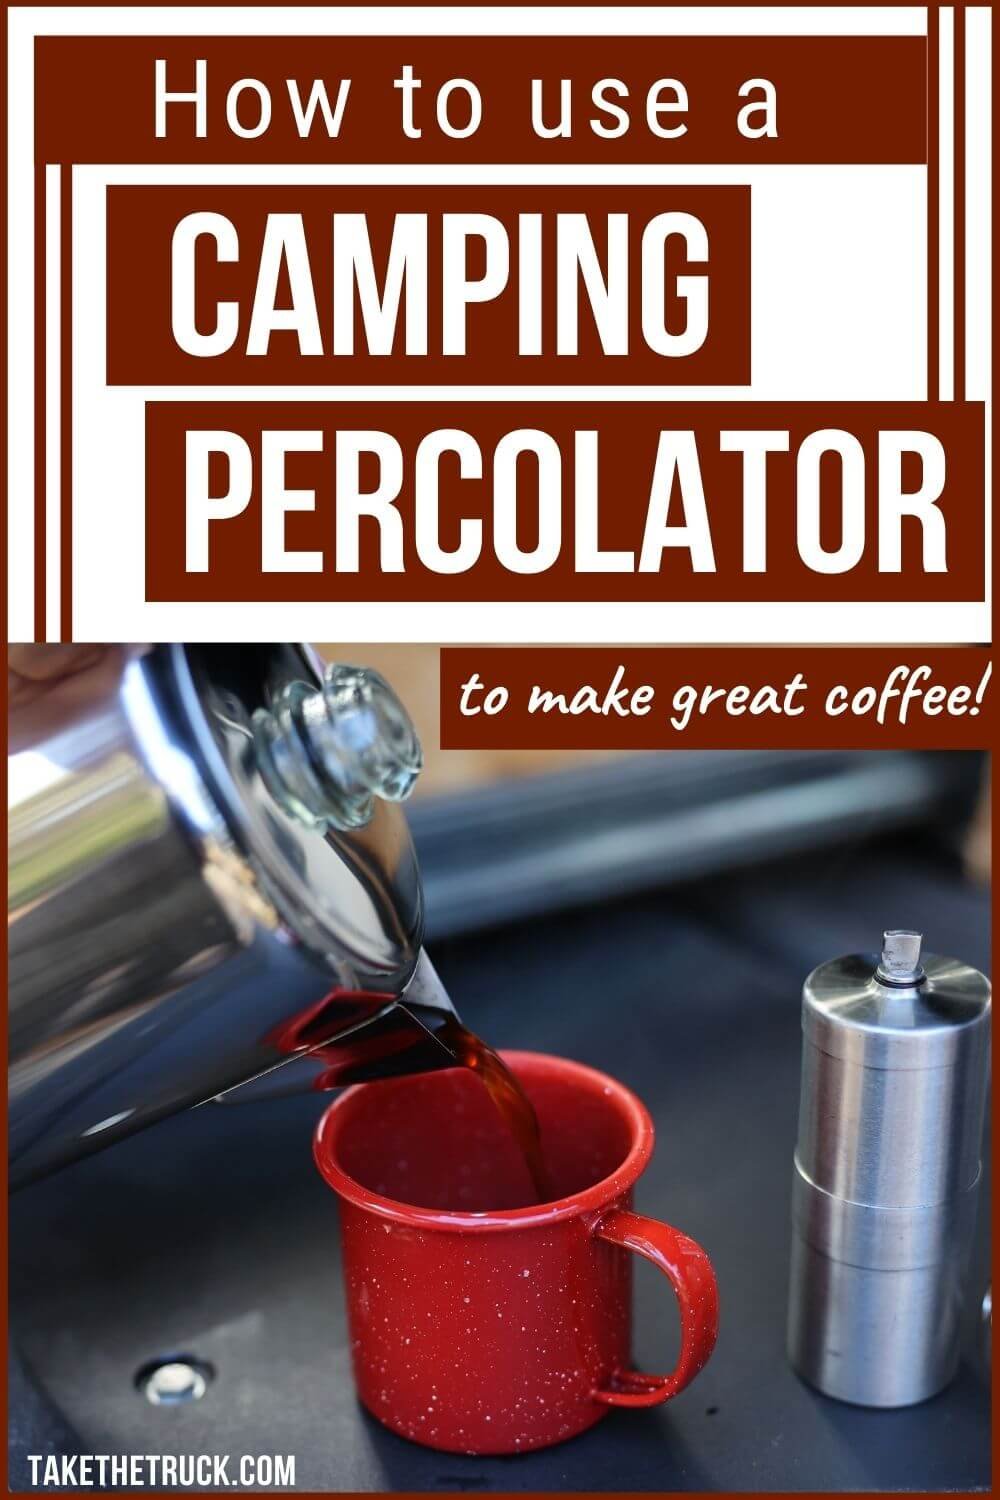  How to find the best camping percolator. How to clean a percolator coffee pot. Camping coffee percolator tips and tricks. Tips on how to use a percolator for camping coffee.